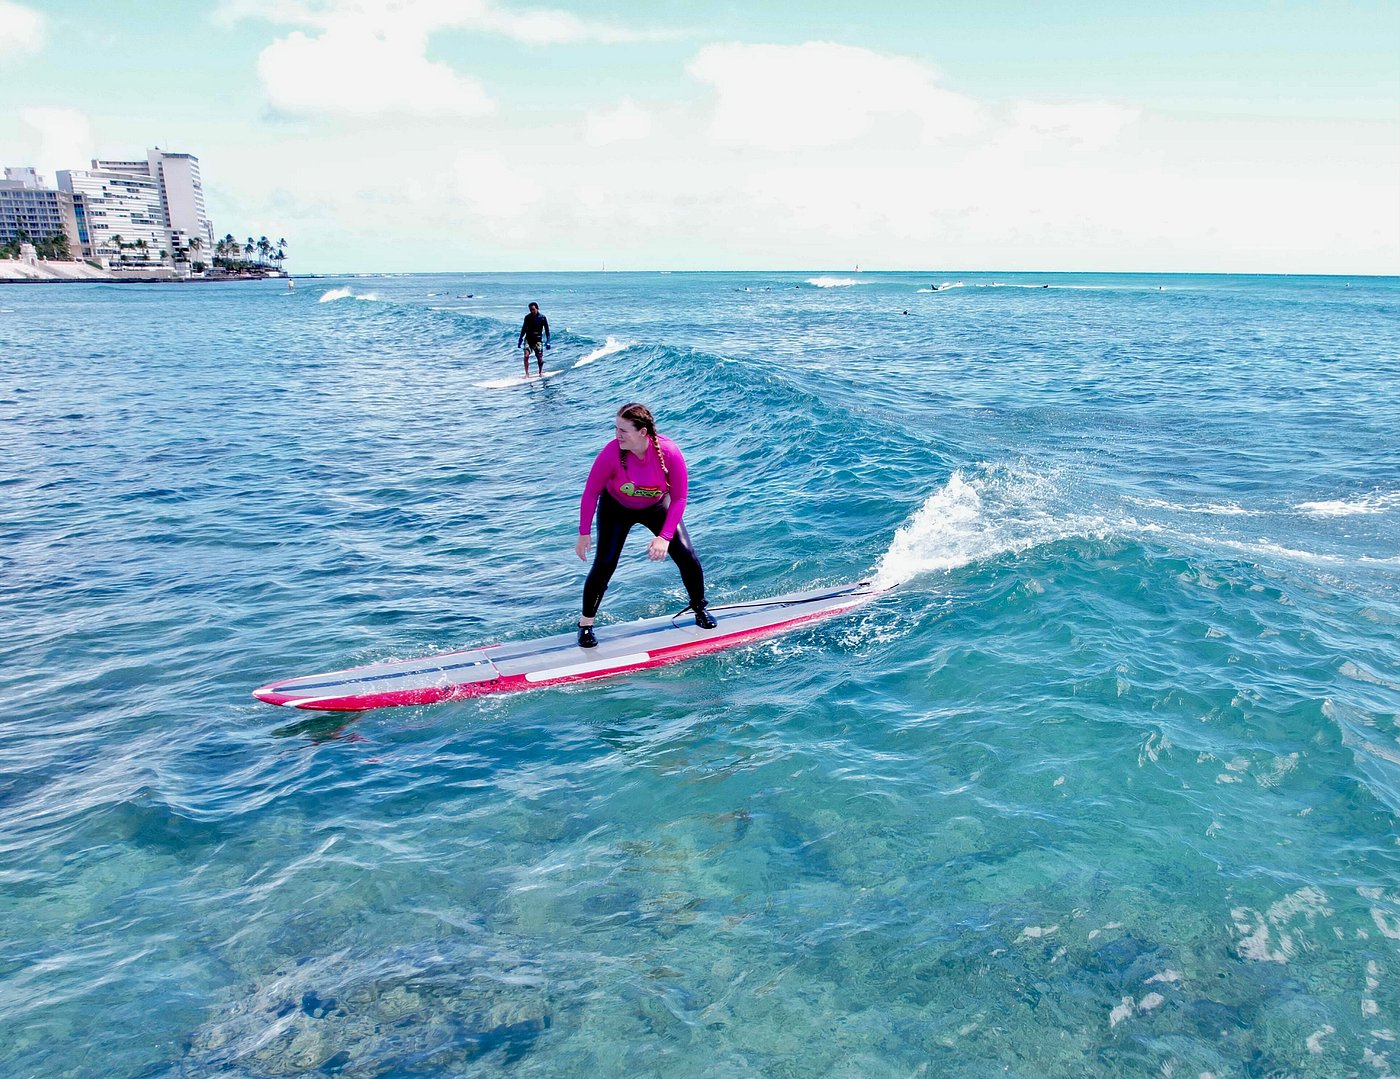 Private and Semi-Private Surfing Lessons in Haleiwa